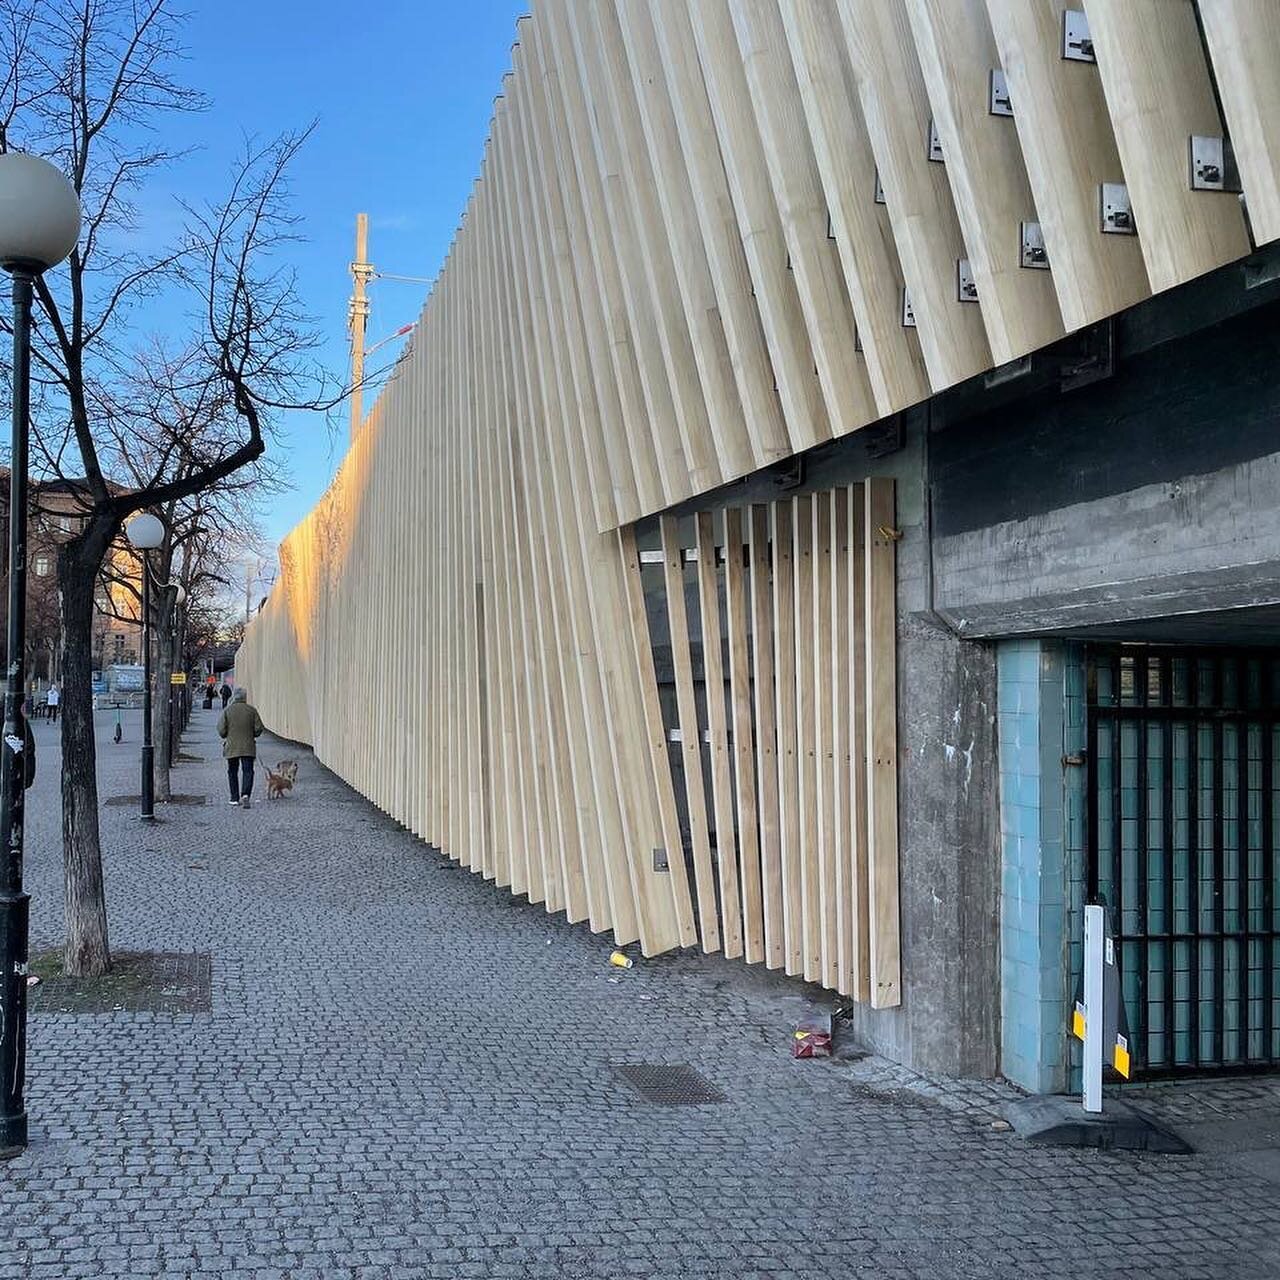 Finished up installing this client project I&rsquo;ve been working hard on for the past few months. Stainless steel custom holders for a parametric wooden facade. Take the Gamla Stan exit and check it out 🌟
.
.
.

#stainless #custom #TIG #welding #w